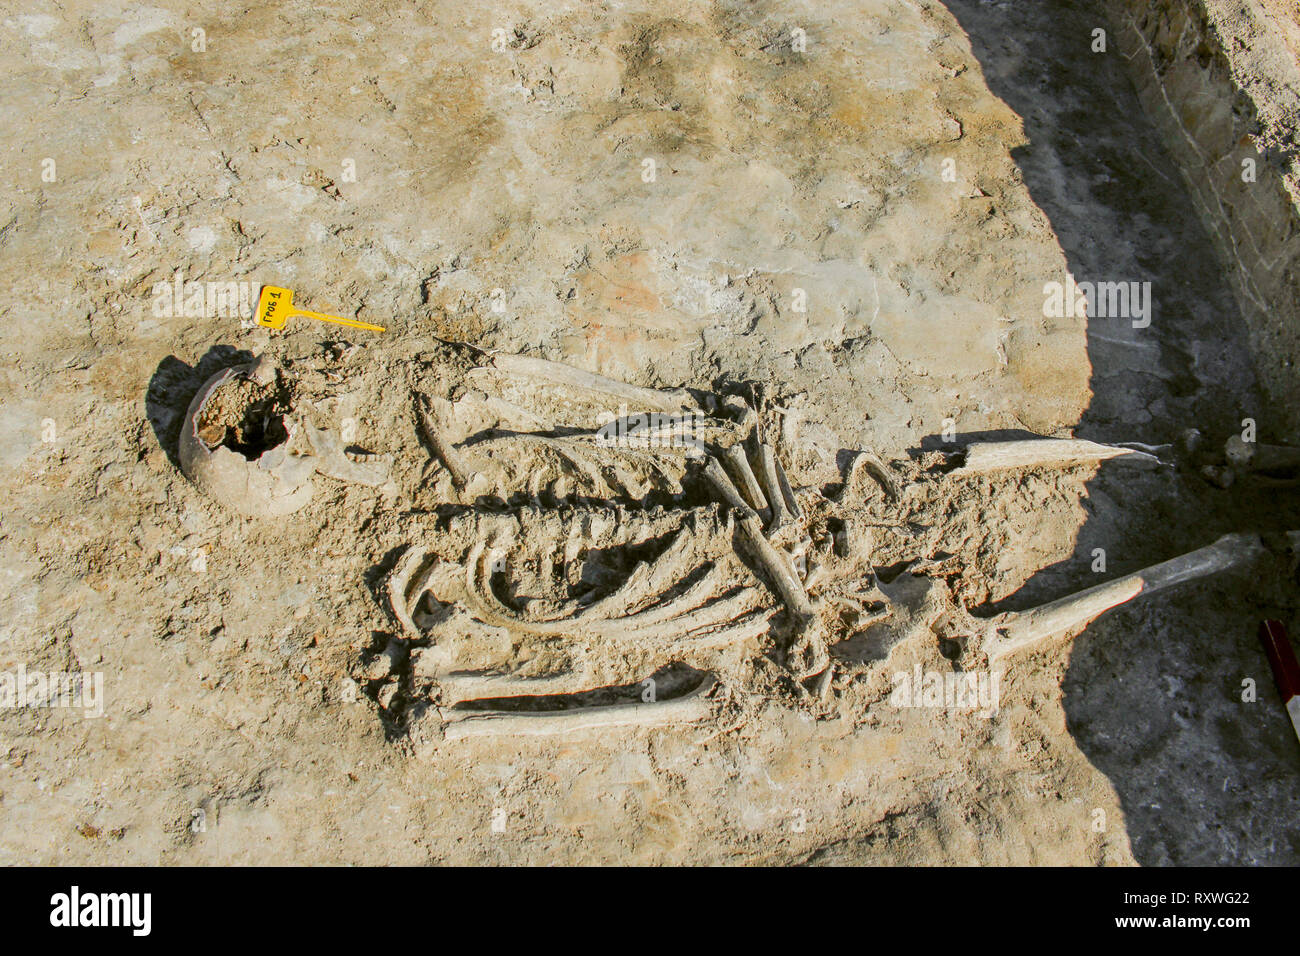 Skeleton in a Roman burial discovered during archaeological excavations Stock Photo